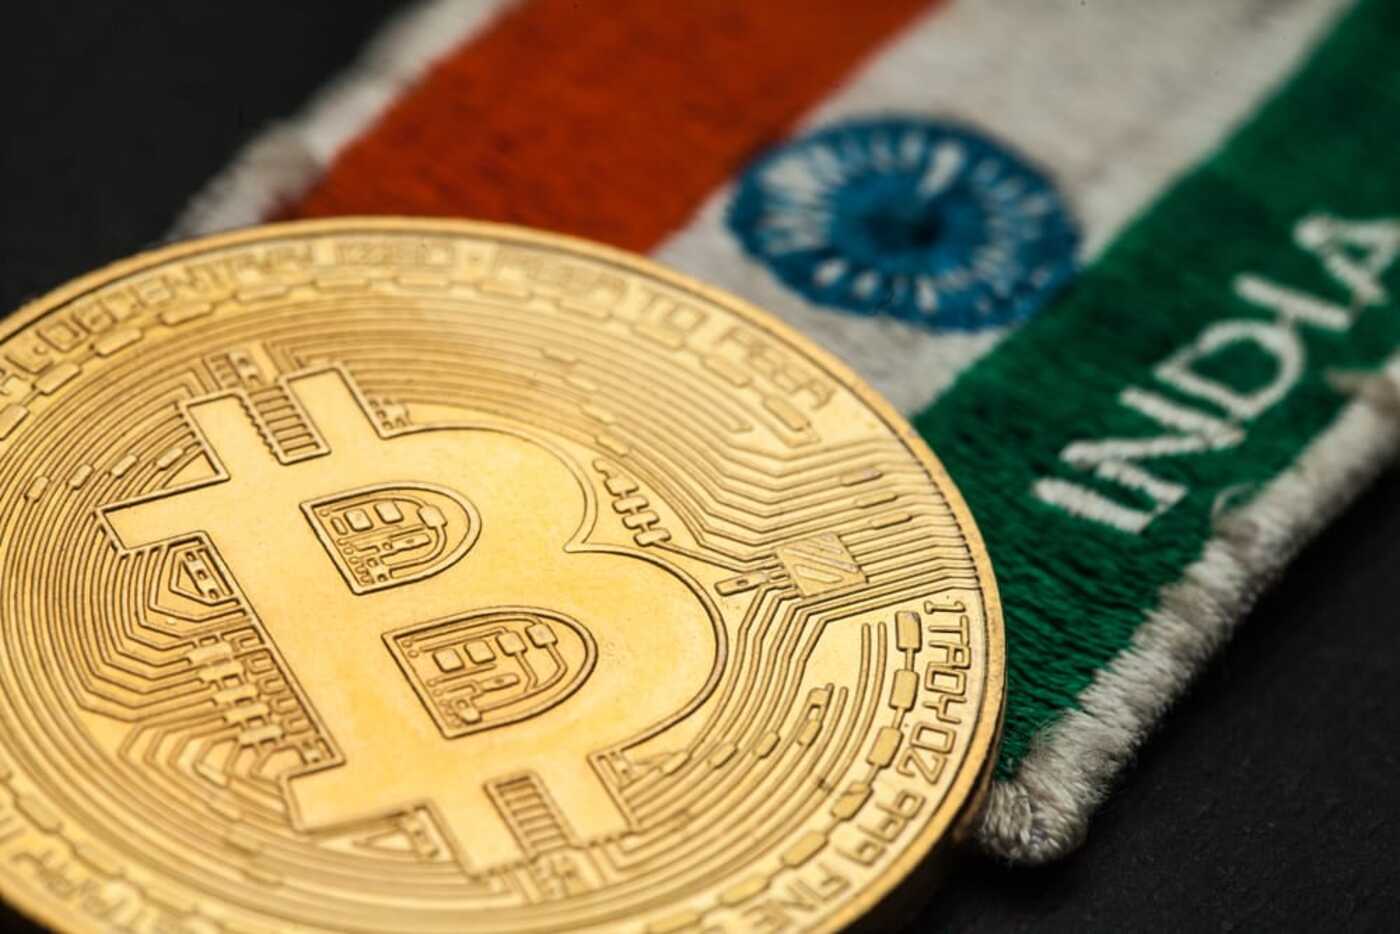 Crypto During The G20 Presidency India Wants Standard Operating Procedures